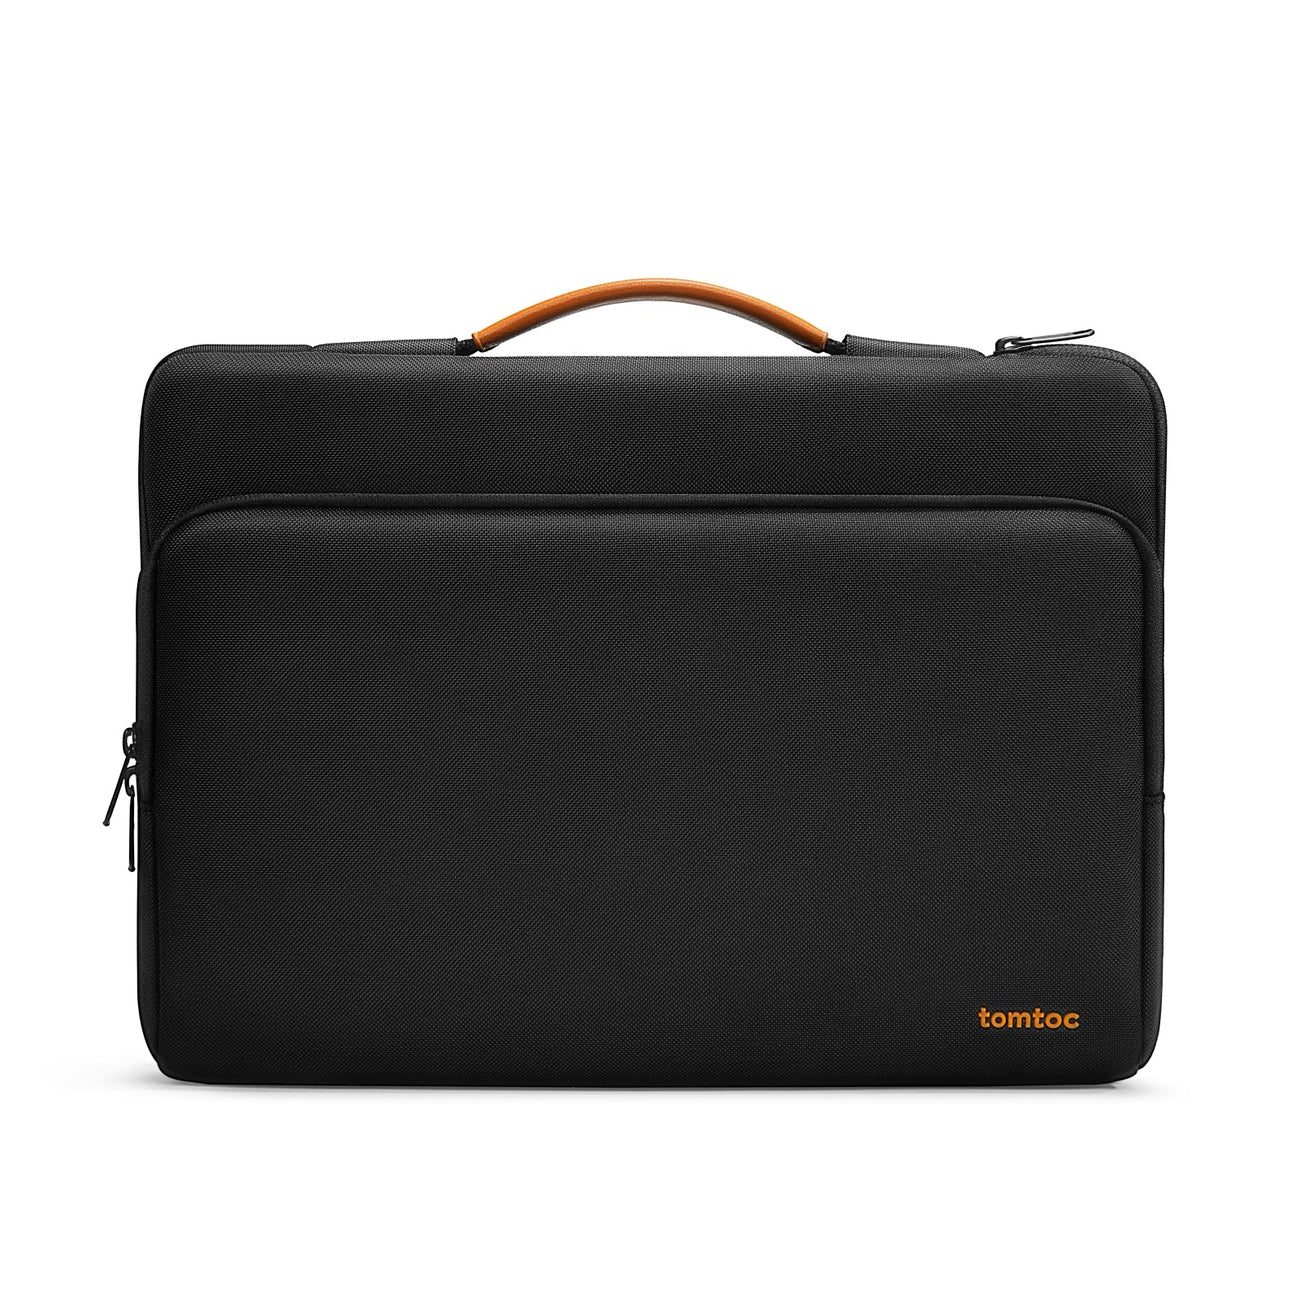 Defender-A14 Laptop Briefcase For 15-inch MacBook Air/Pro